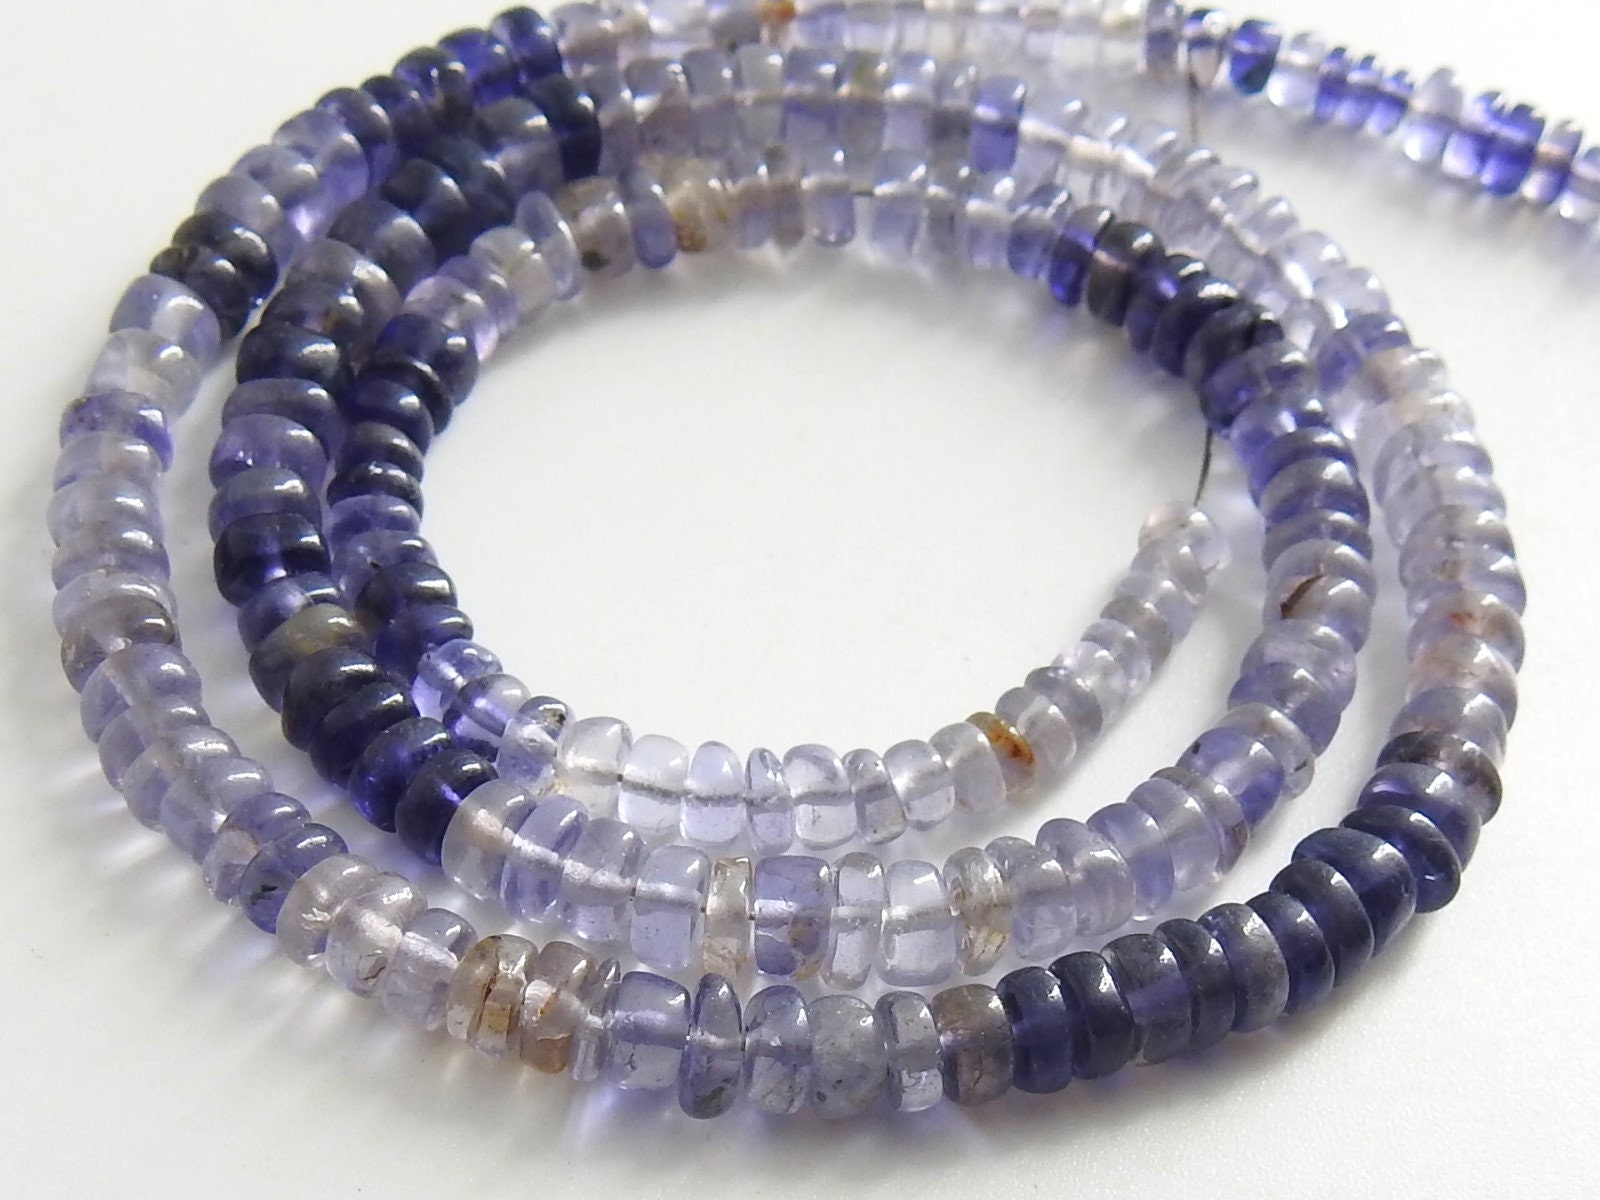 Iolite Smooth Roundel Bead,Handmade,Multi Shaded,Loose Stone,Necklace,For Making Jewelry,Blue,Wholesaler 16Inch 4MM Approx 100%Natural B10 | Save 33% - Rajasthan Living 17